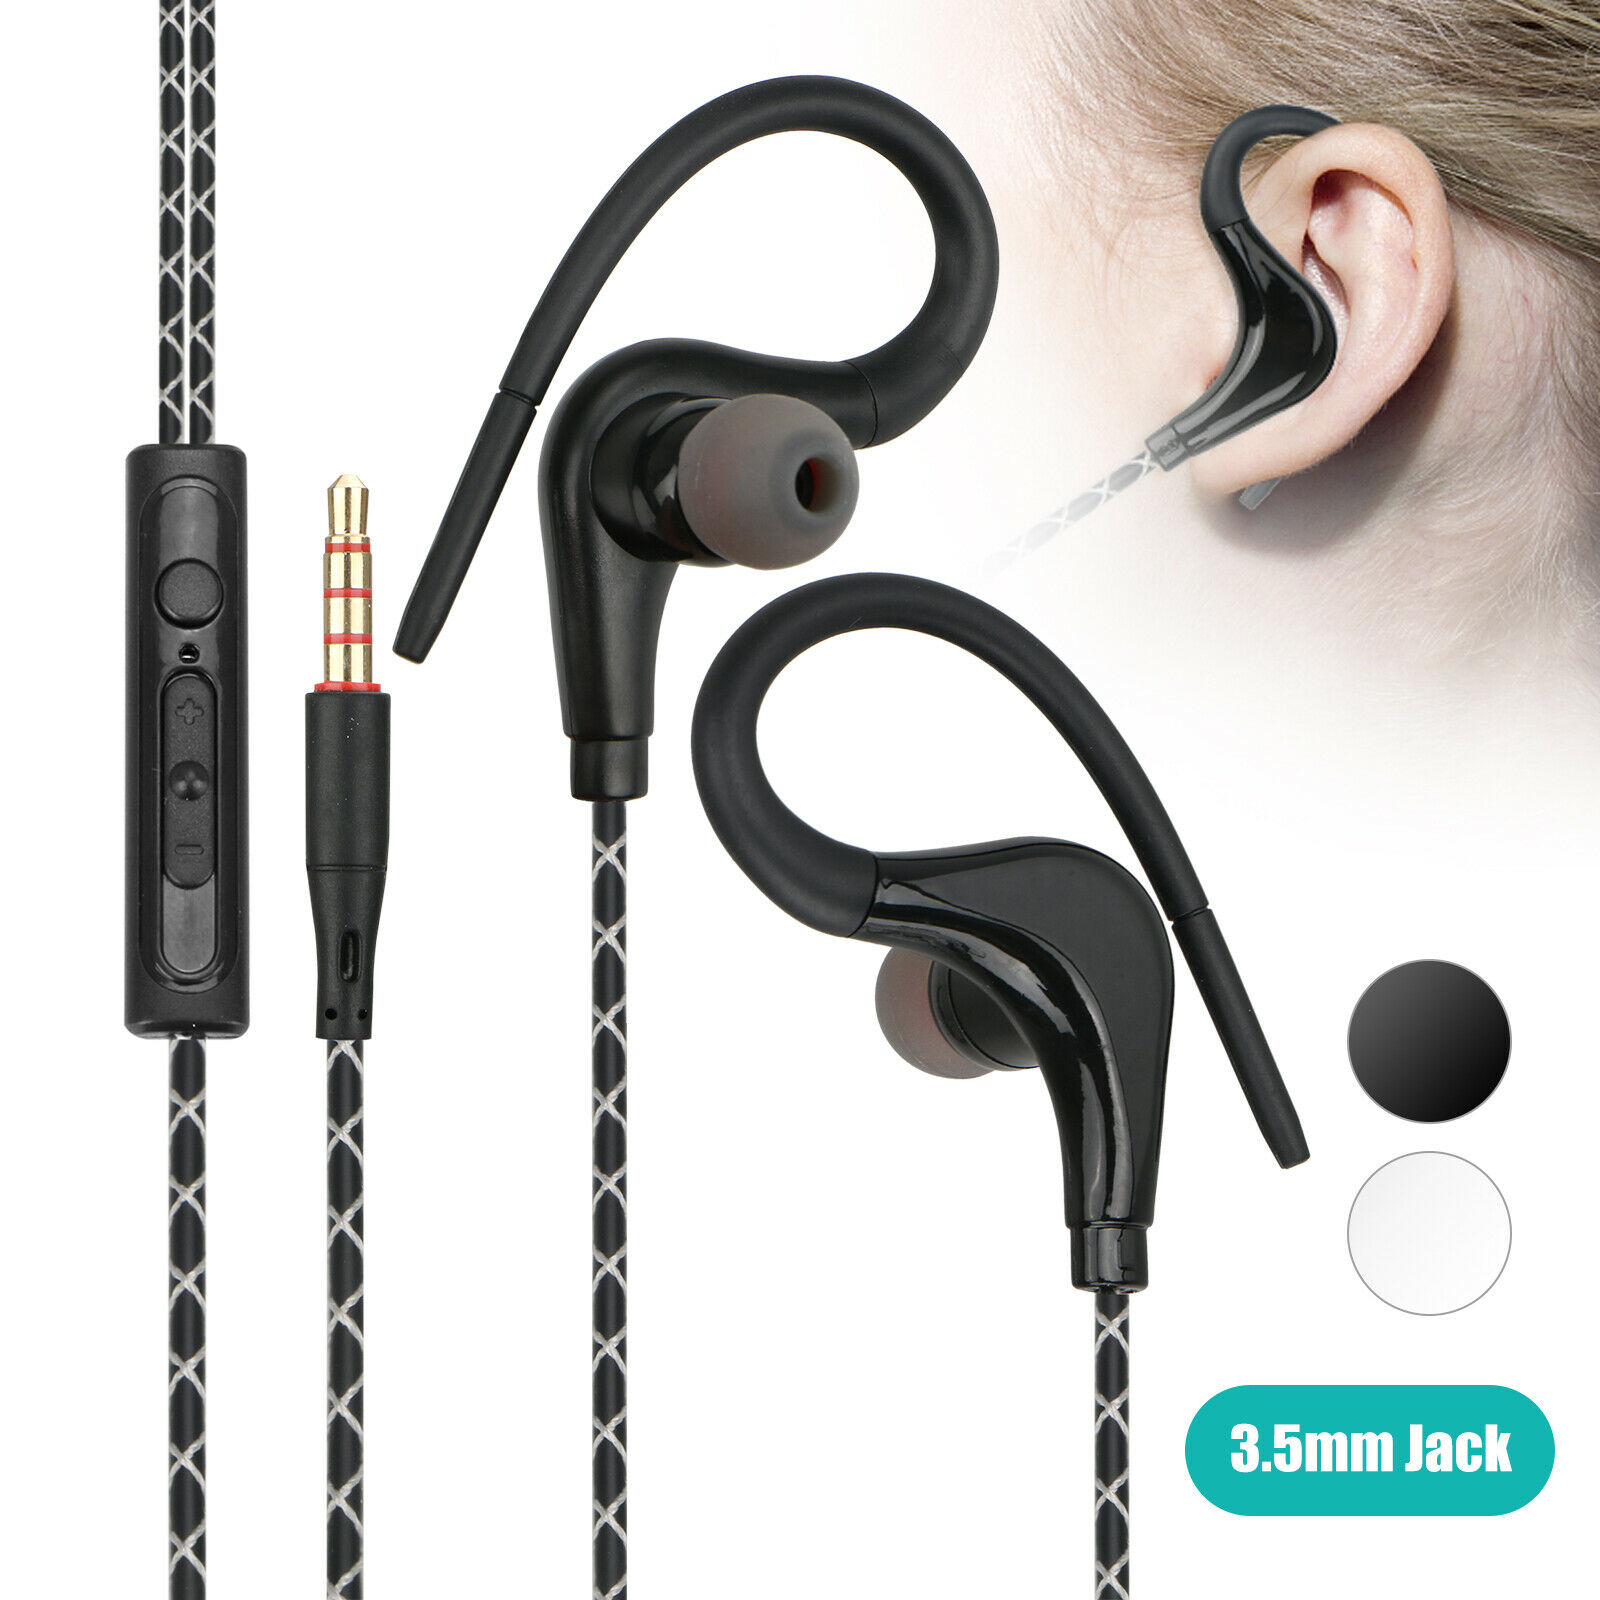 Wired Earbuds, Earbuds with Microphone and Volume Control, in Ear Ergonomic Noise Isolating Headphones, Earphones with 3.5mm Jack,Powerful Bass Sound - image 1 of 8